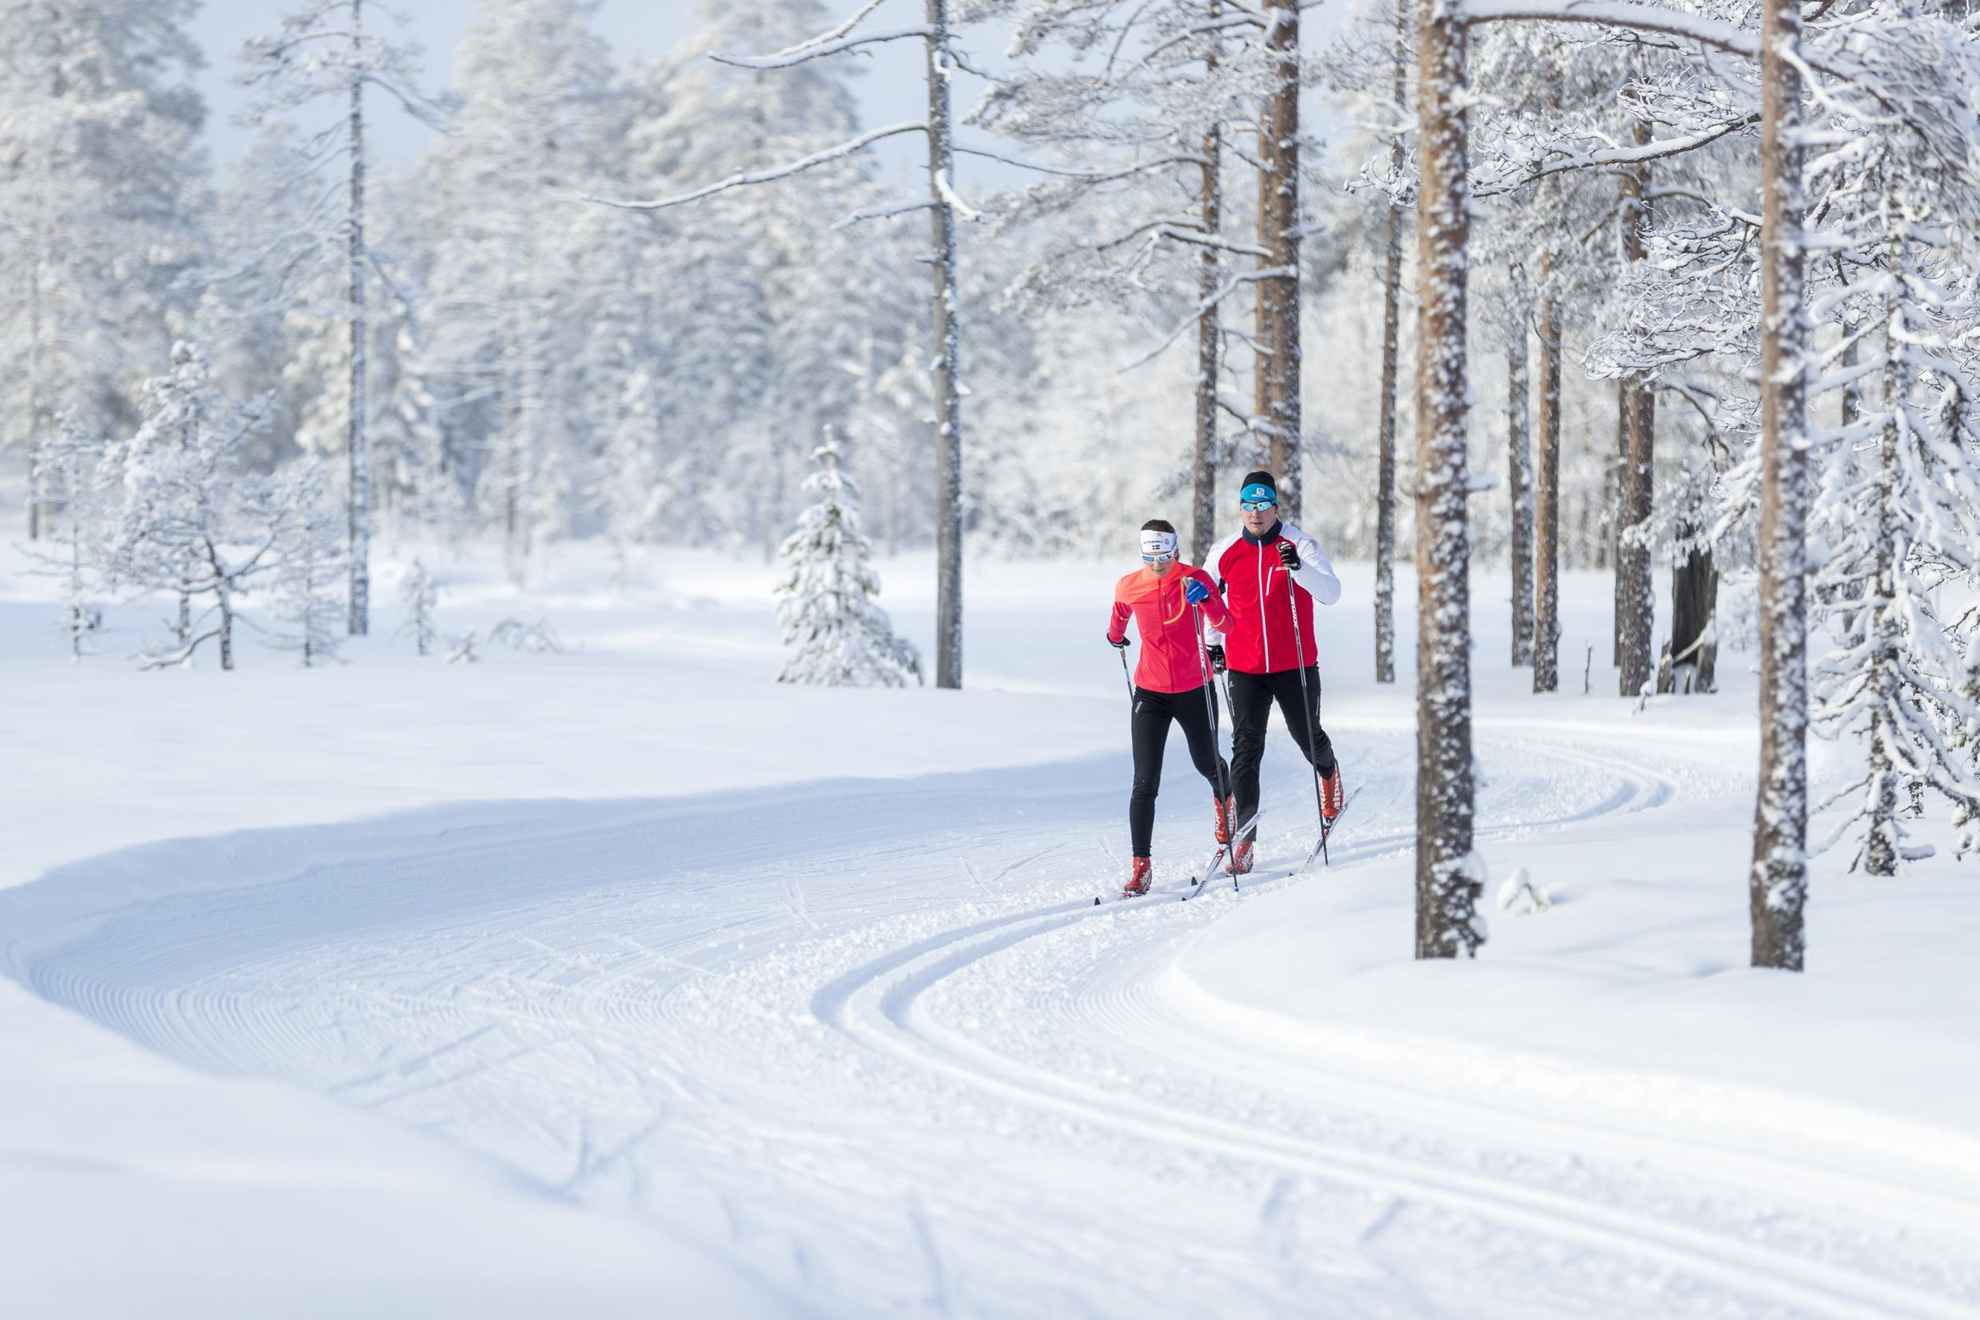 Two people in red jackets are cross-country skiing in a snow-covered forest.